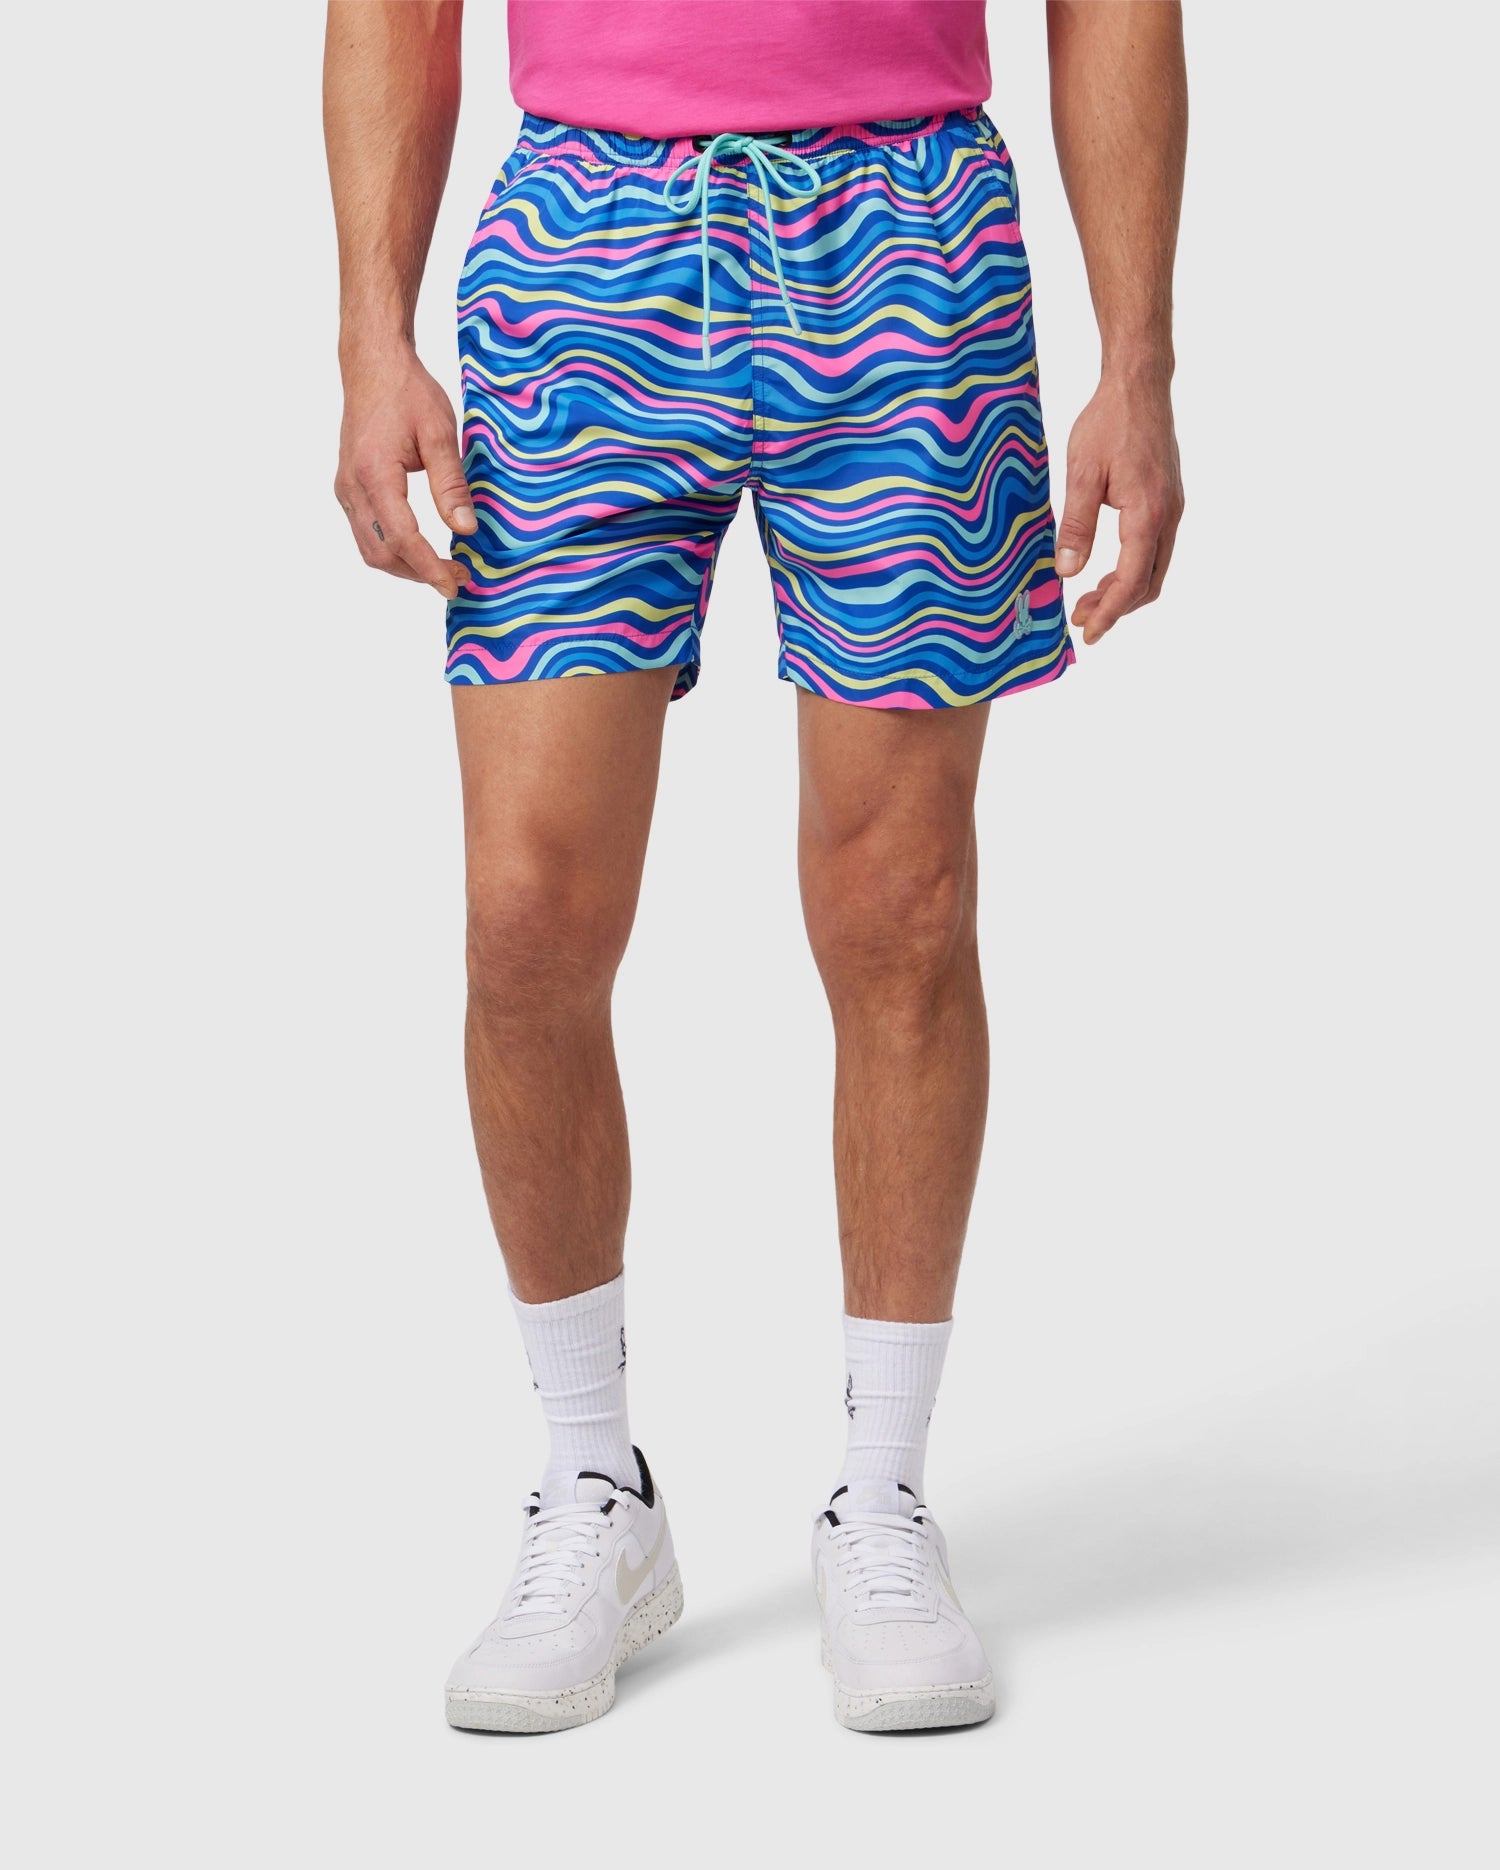 A person wearing a pink shirt, Psycho Bunny MENS CLARKSON LIGHTWEIGHT SWIM TRUNK - B6W120B2SW with a wave-like pattern in shades of blue, pink, and purple, white socks, and white sneakers stands against a plain white background. The photo is cropped to show from the neck down to the feet.